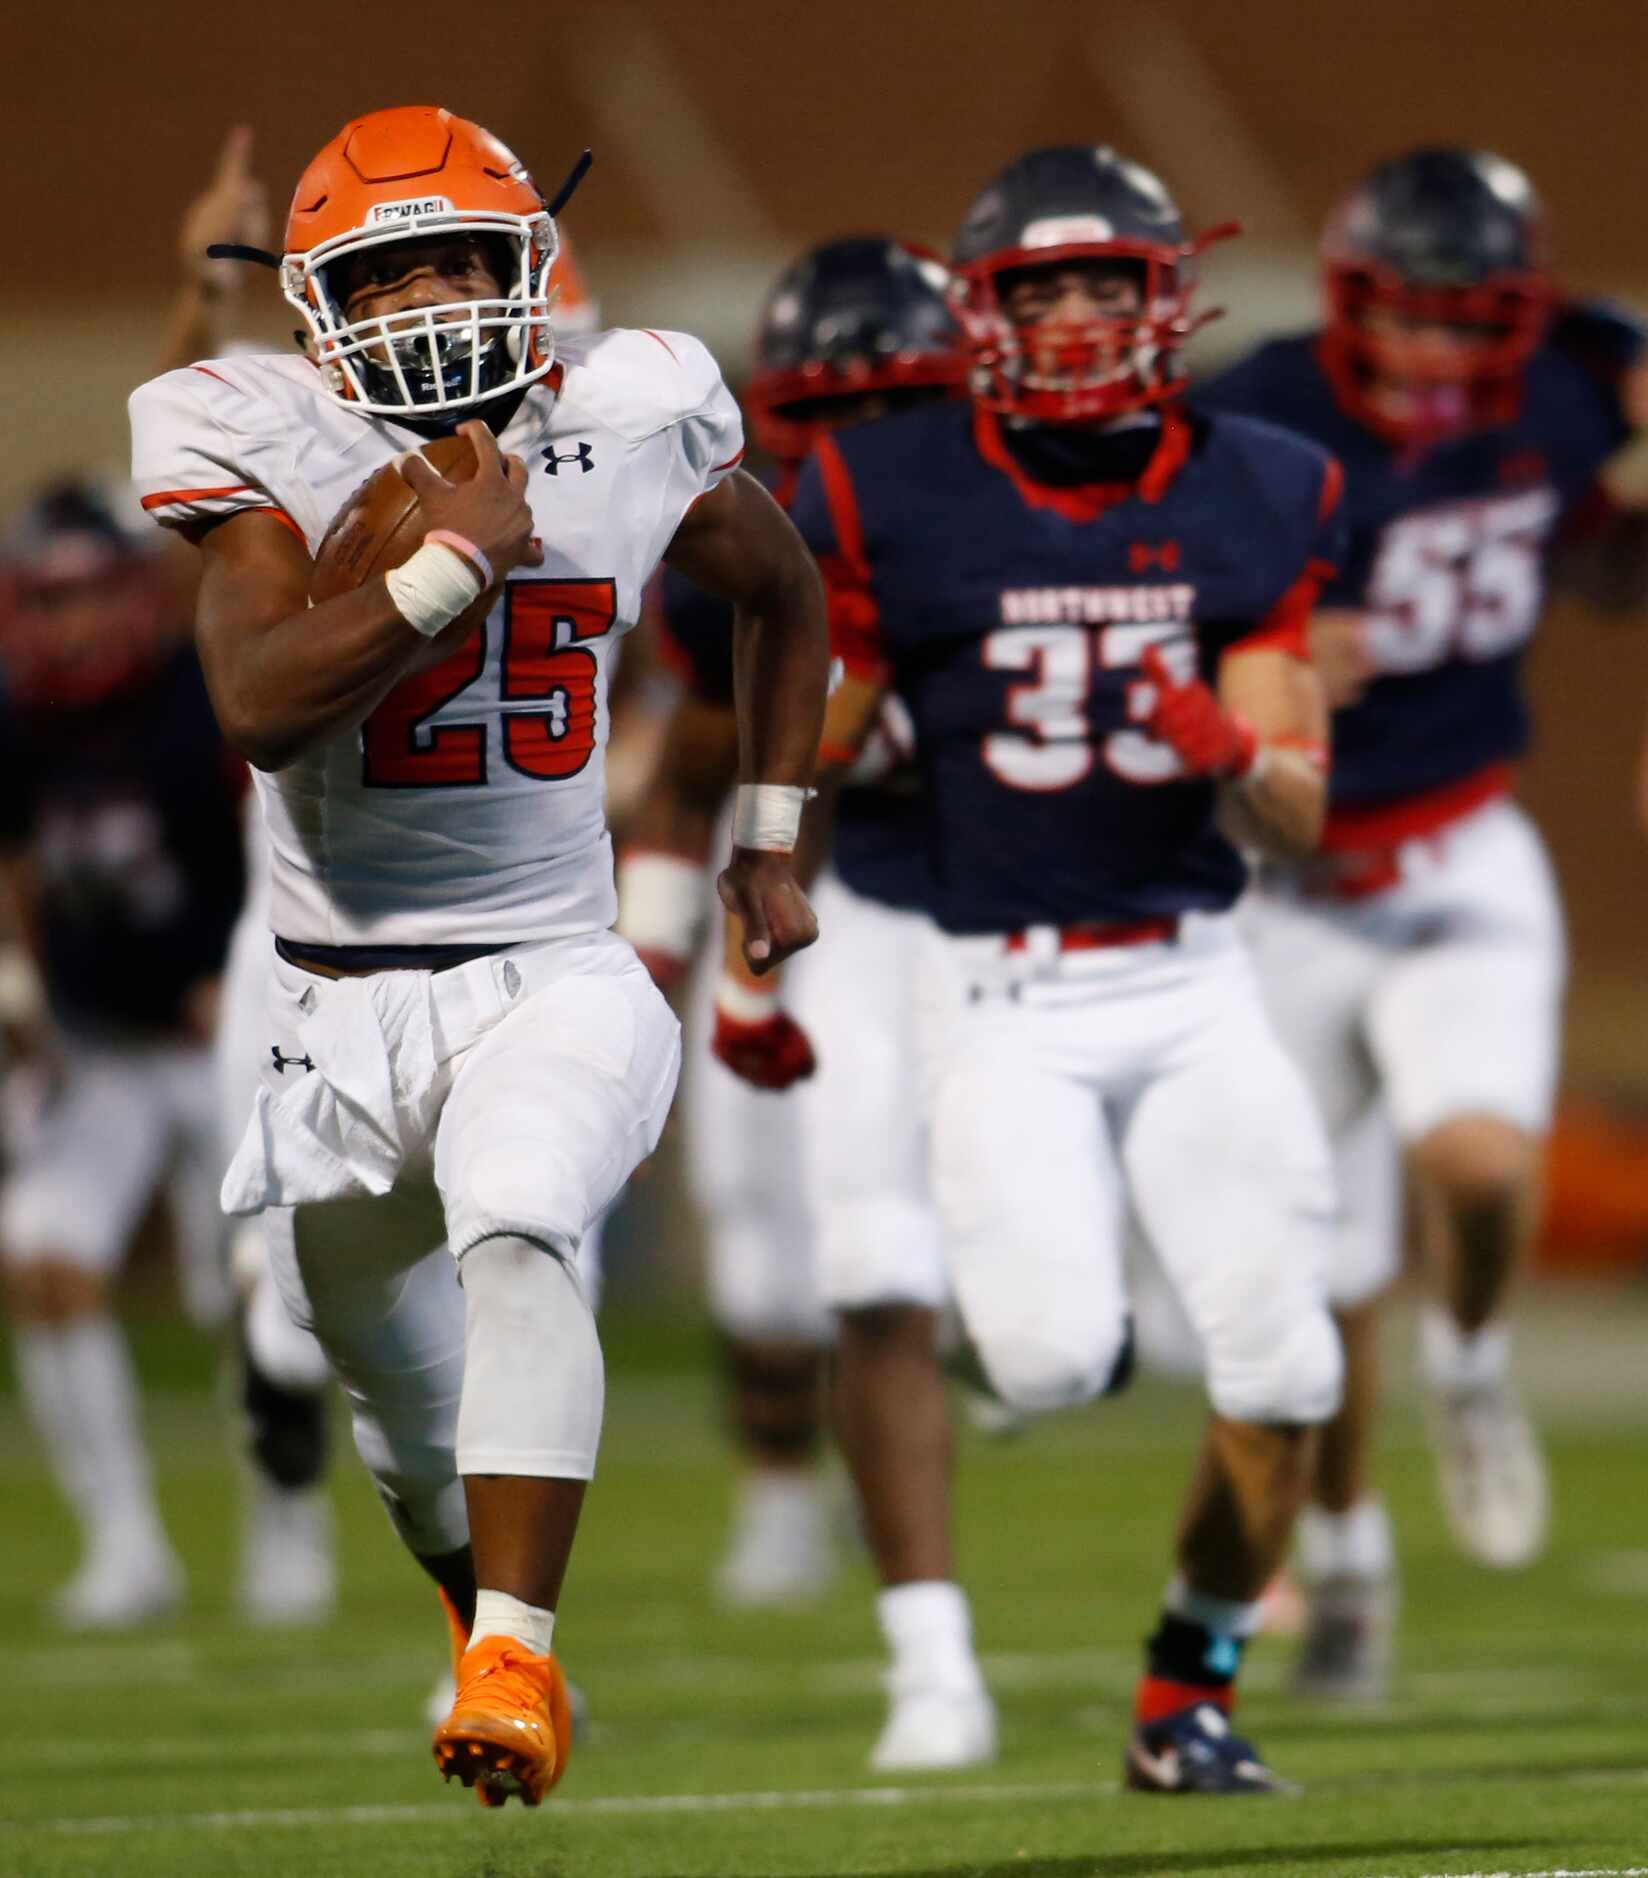 McKinney North running back Jayden Smith (25) is "off to the races" as he leaves several...